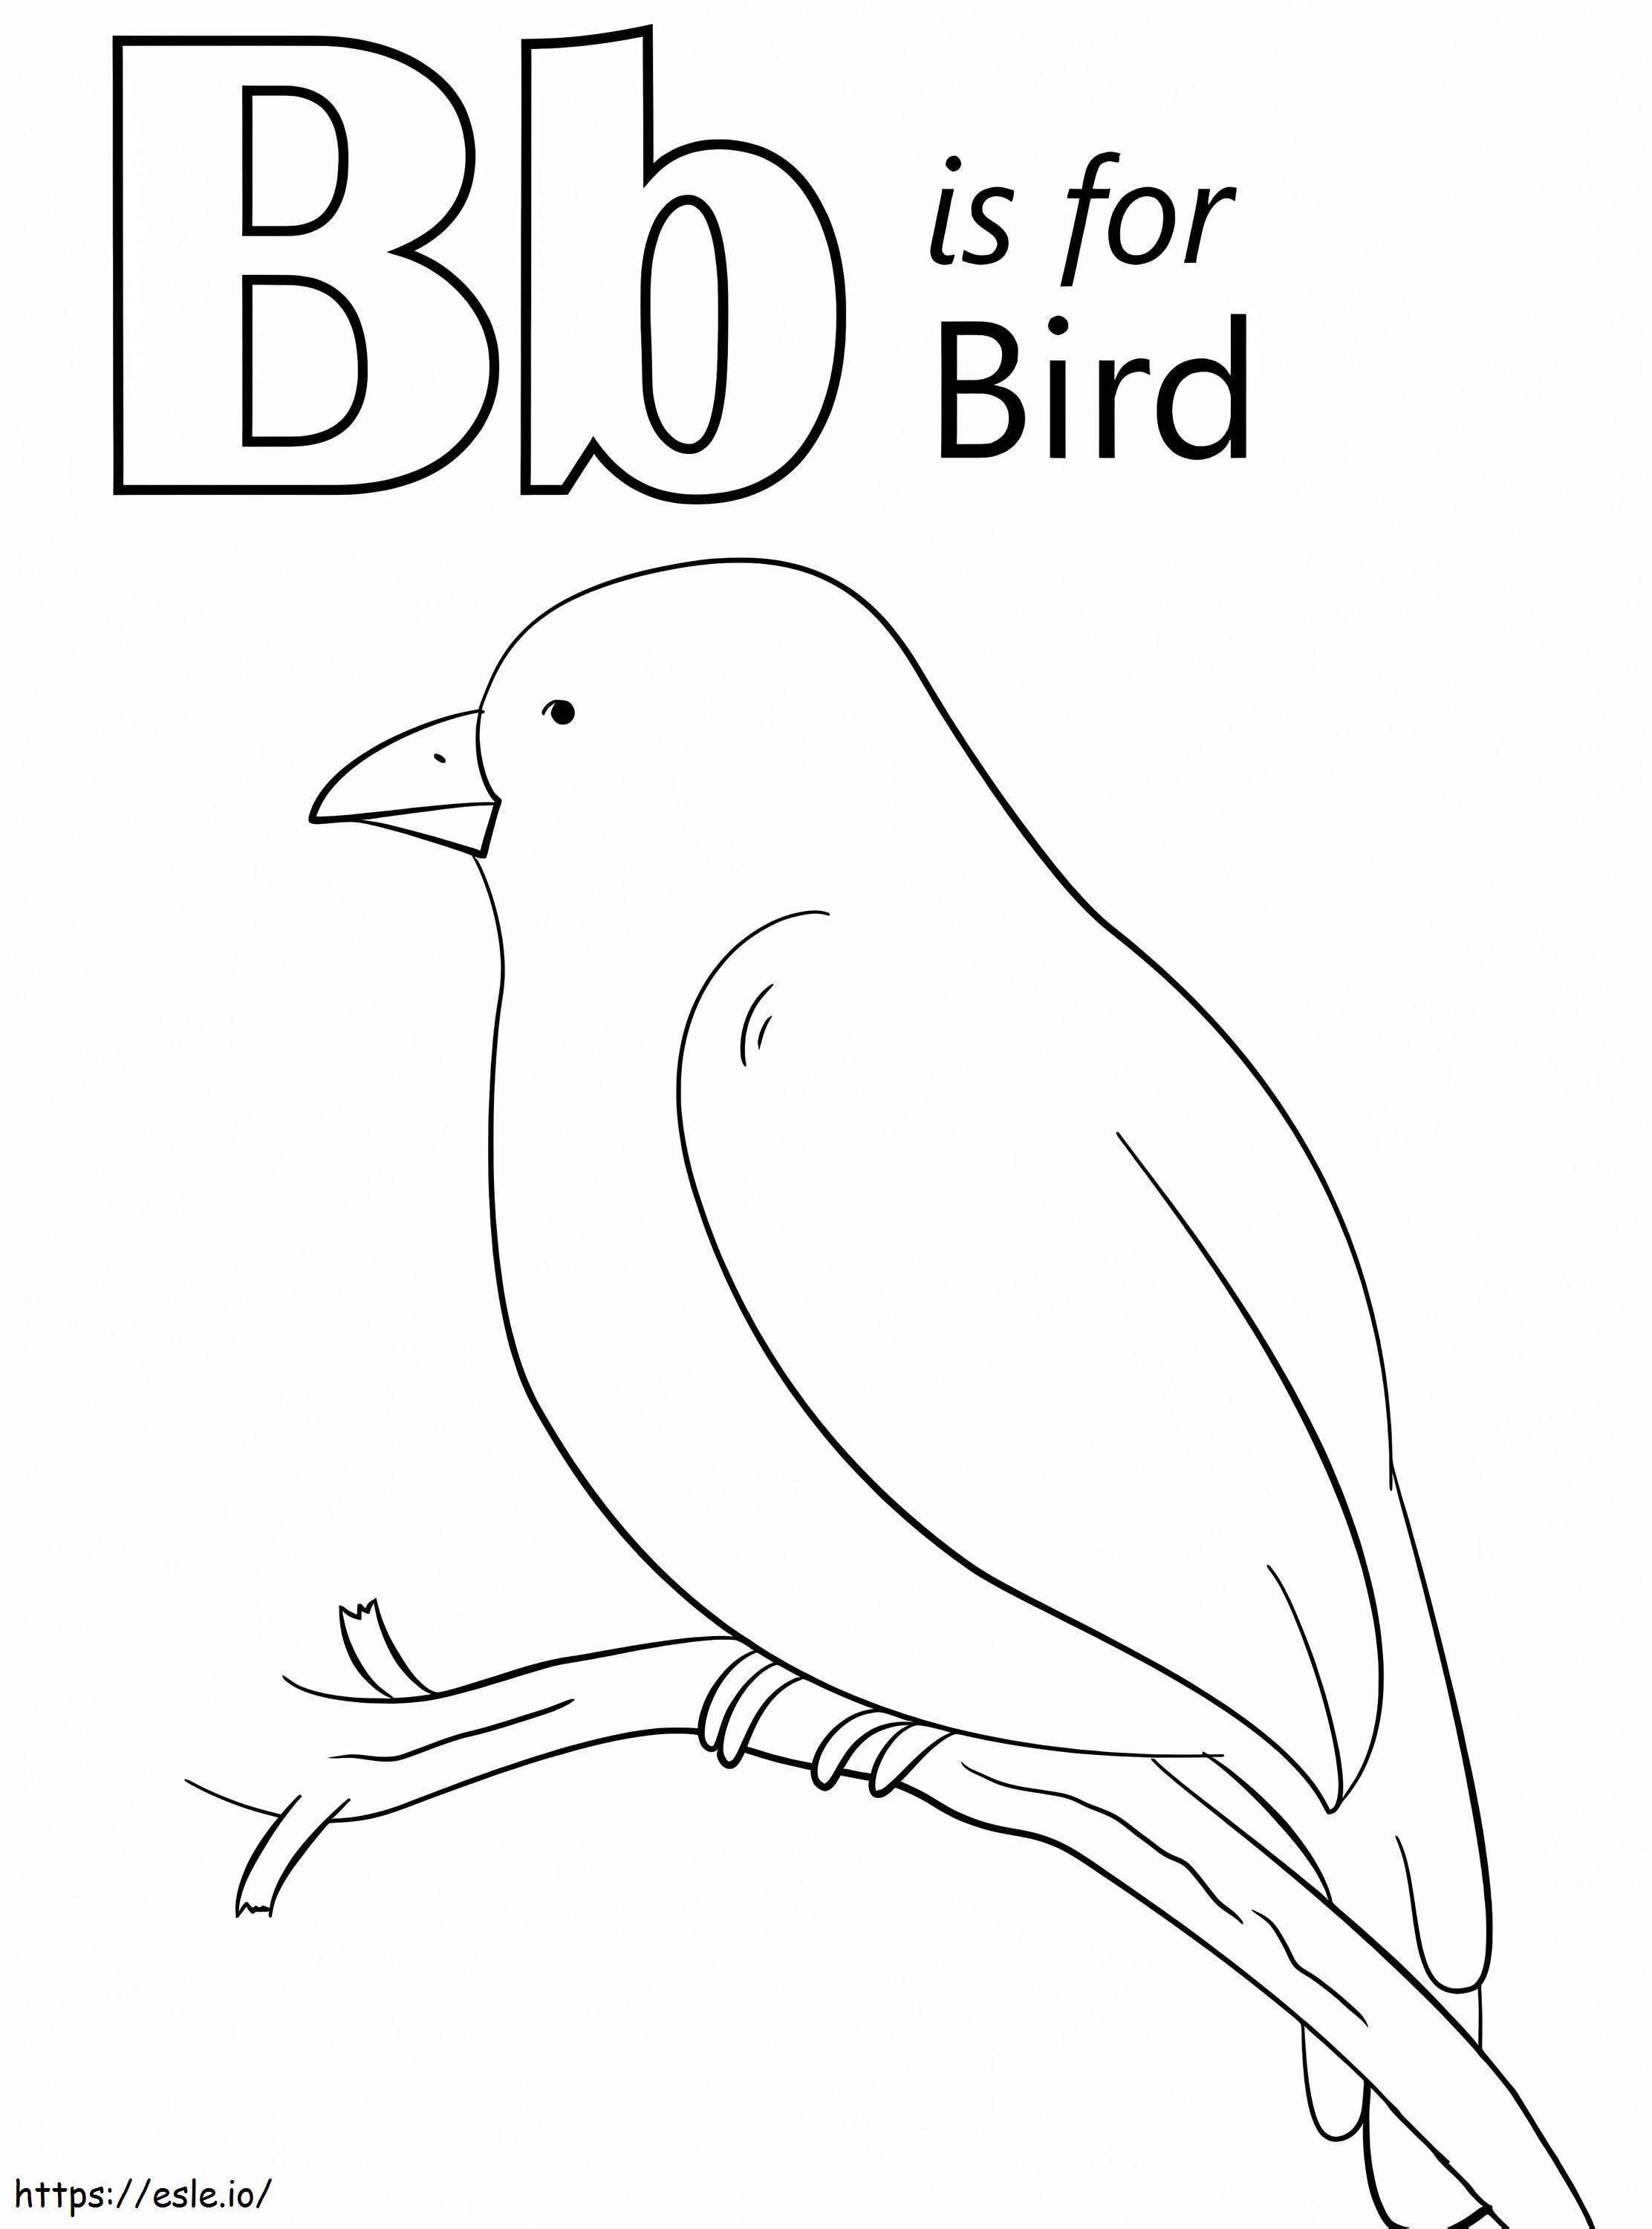 Bird Letter B coloring page